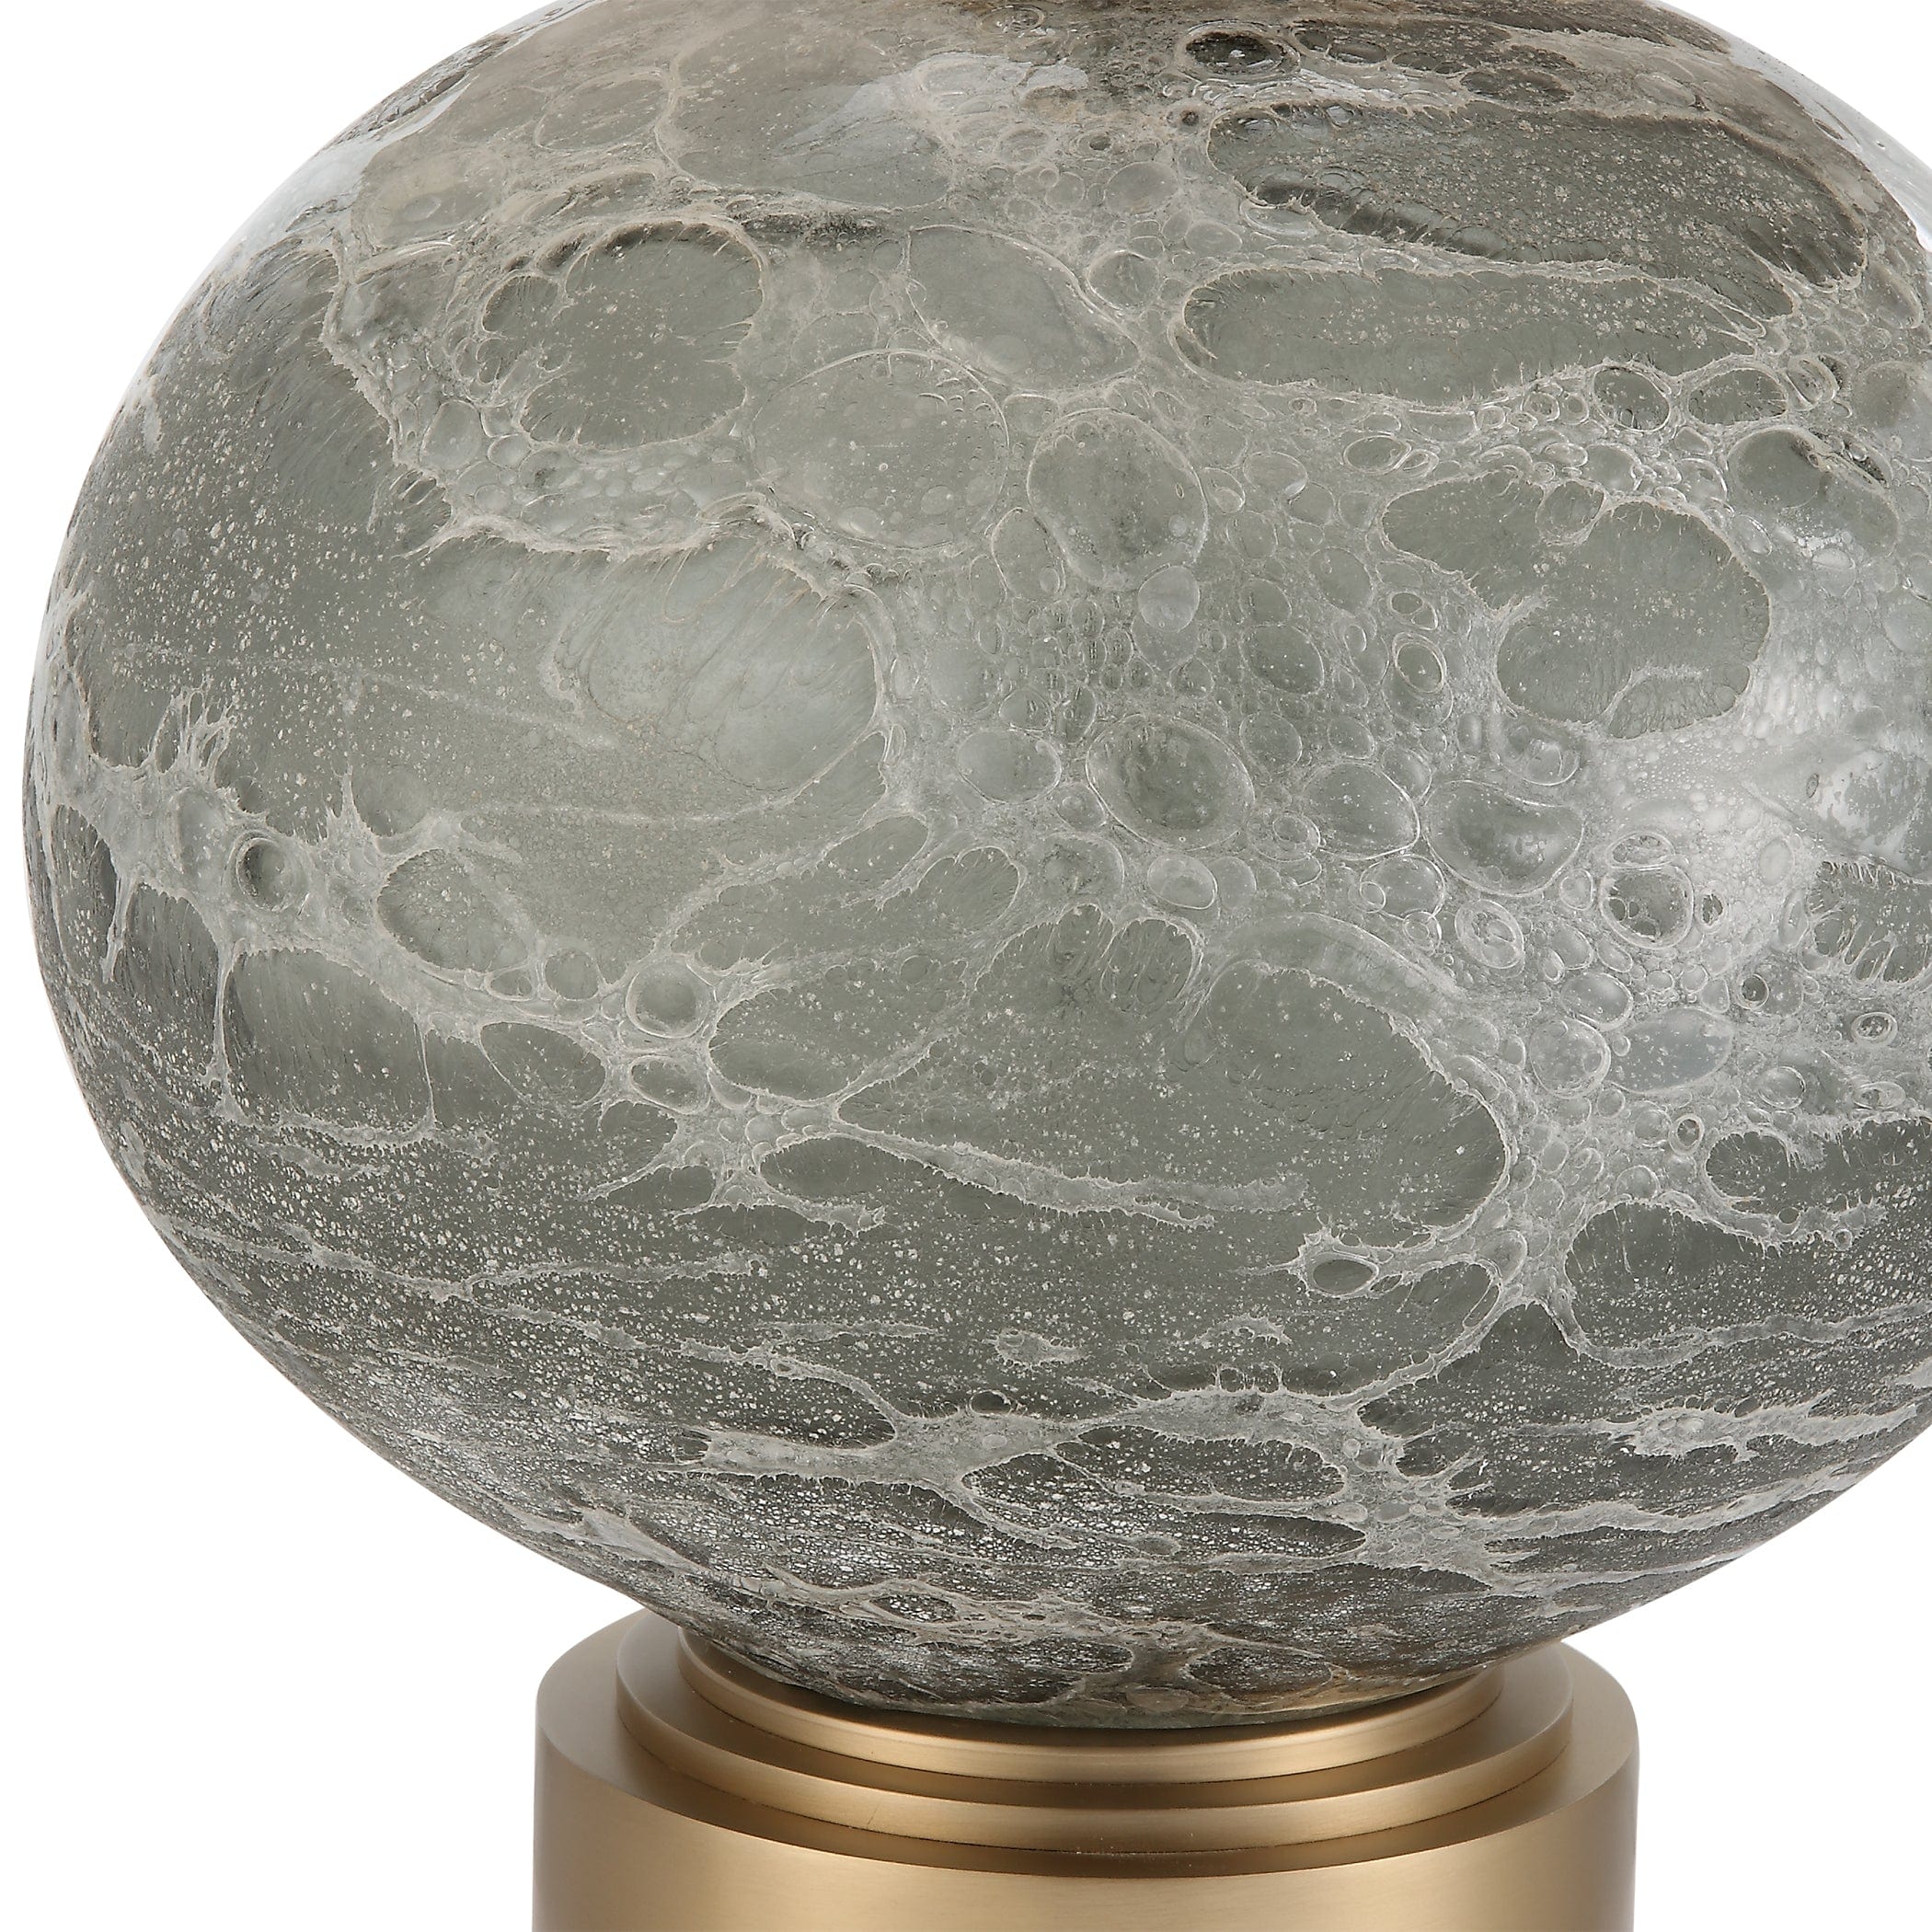 Lunia Gray Glass Table Lamp Uttermost